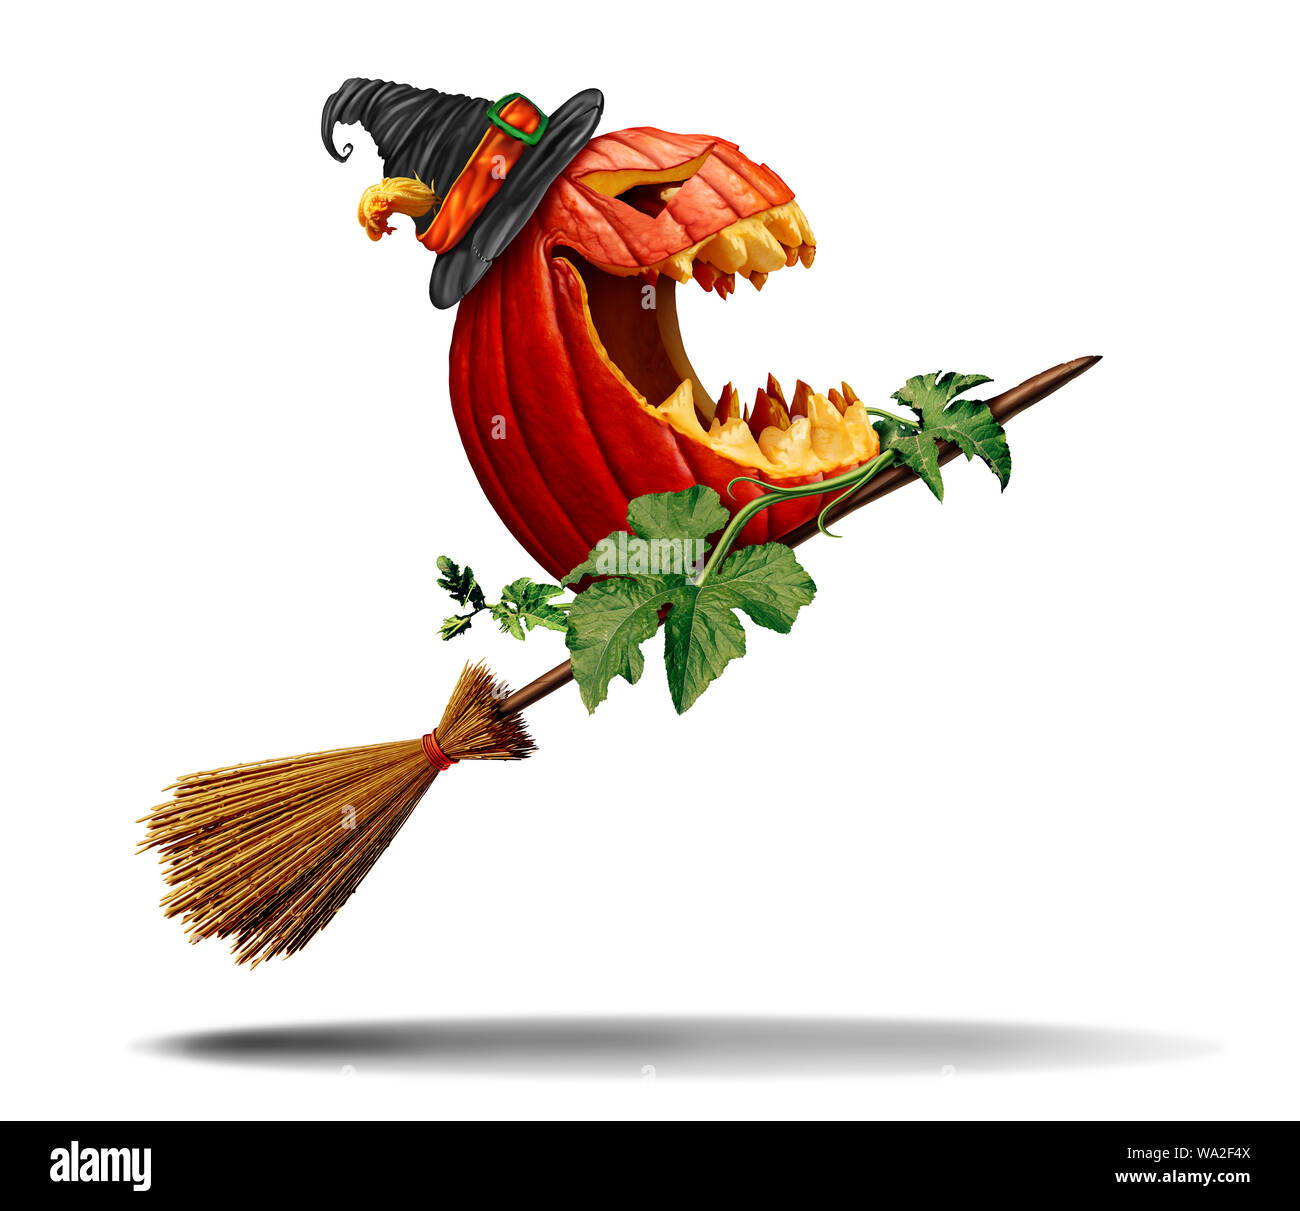 Halloween pumpkin and witch broom as an old magical besom for a magical jack o lantern as a symbol for fall and autumn festive communication. Stock Photo